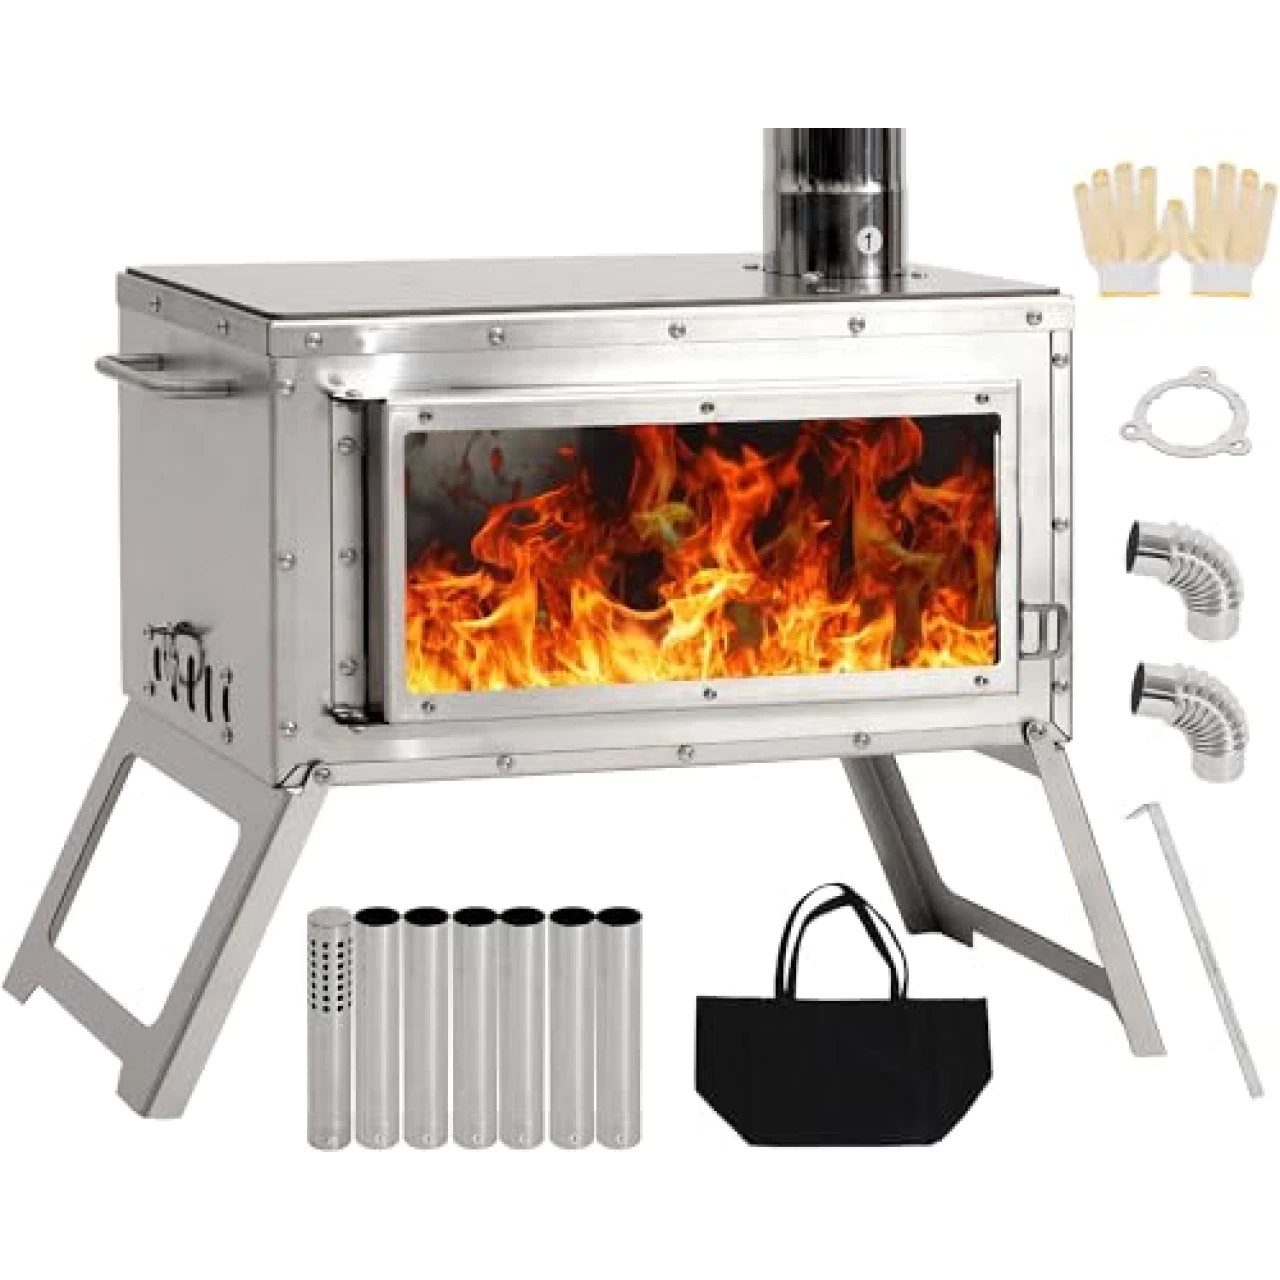 LEISU Tent Stove Portable Outdoor Wood Burning Stove with Chimney Pipe